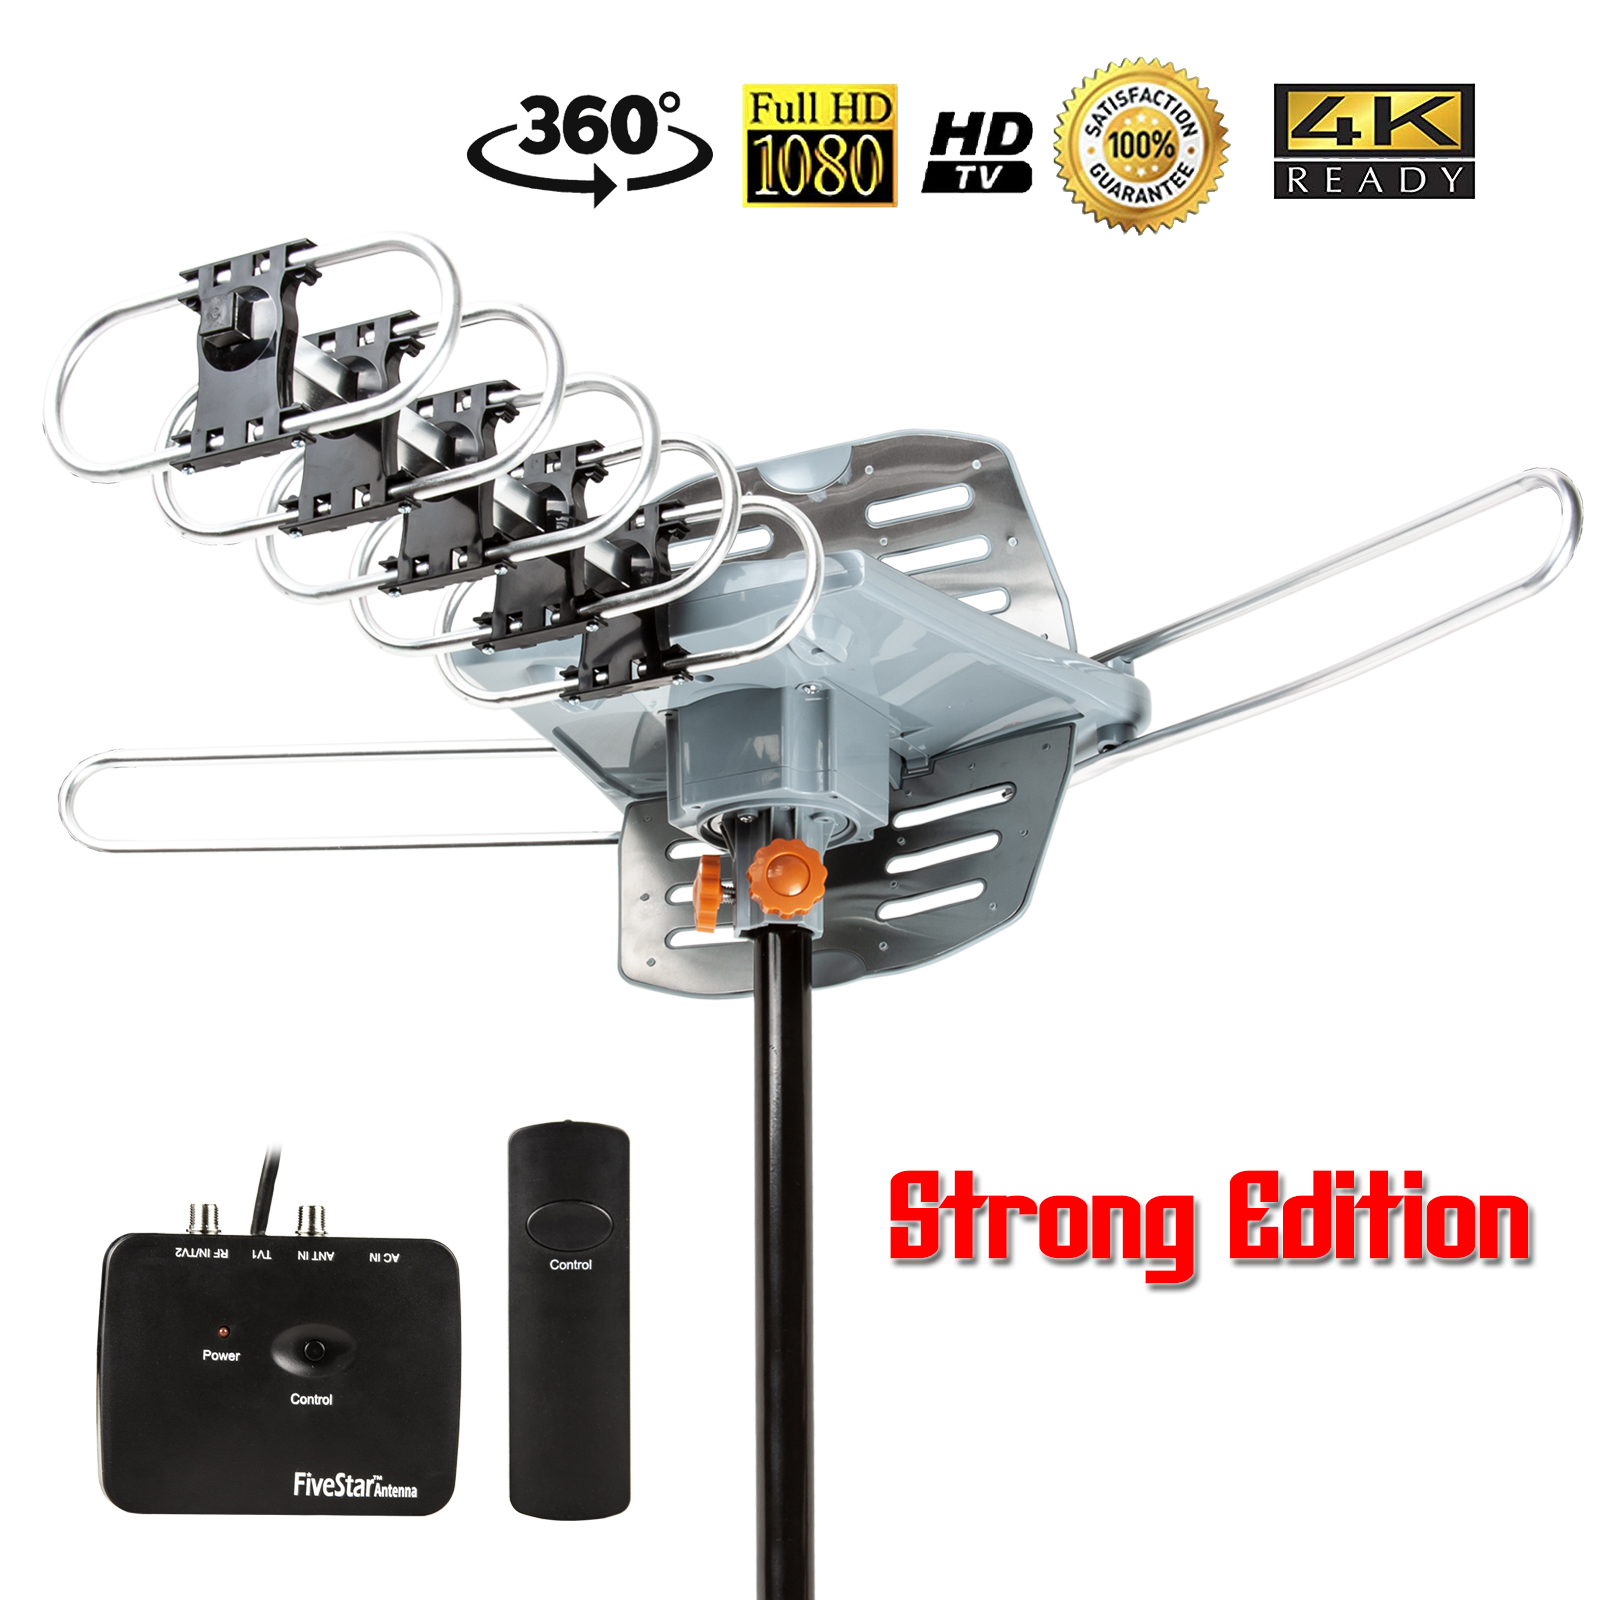 TV Antenna HiDB Indoor Digital HDTV Antenna 150 Miles Range with Amplifier Signal Booster 4K 1080P HDTV Aerial with clock function Free for Local TV Channels Support All Television VHF//UHF//FM 10FT Coax Cable with USB Power Adapter